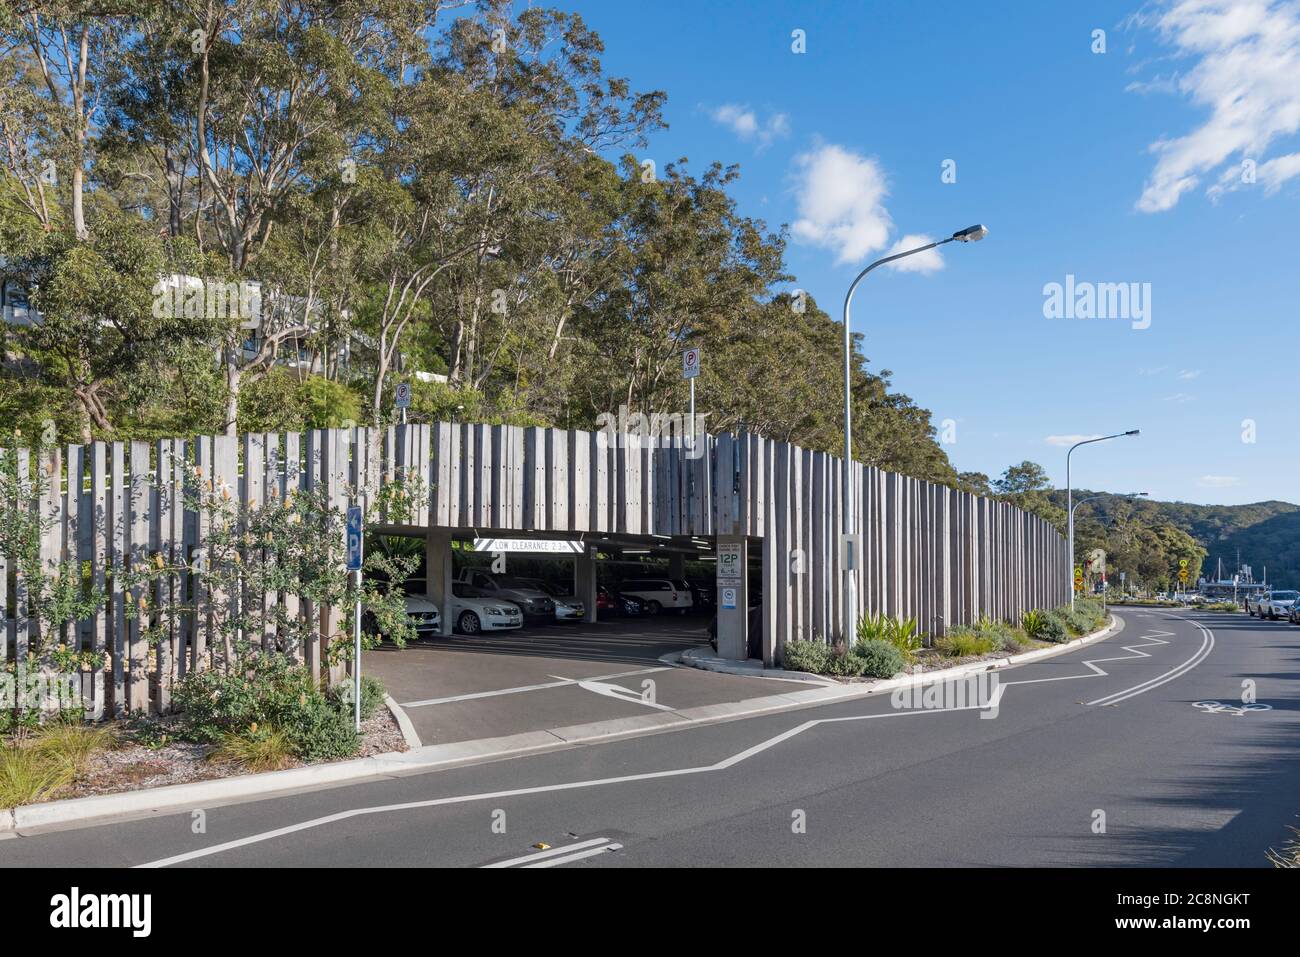 The Church Point, Sydney car park designed and built in 2018 by Ward Group uses eucalyptus vertical timber to blend in naturally into its surroundings Stock Photo